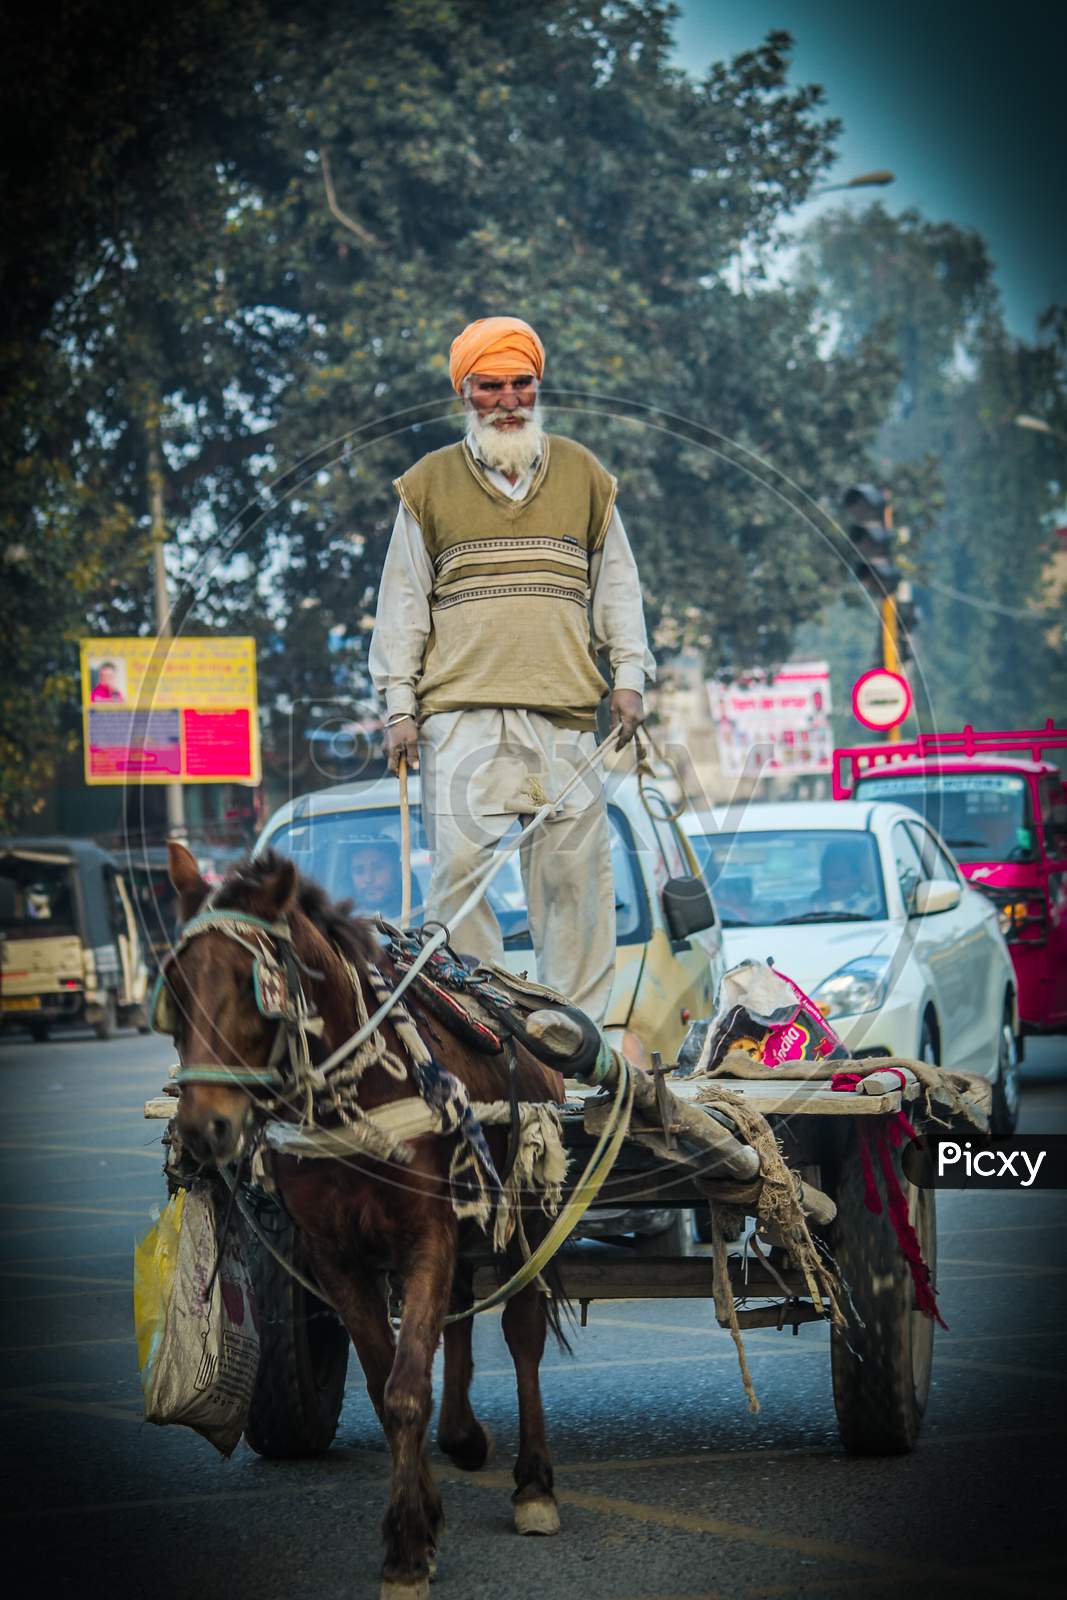 Old man riding the horse cart in Amritsar